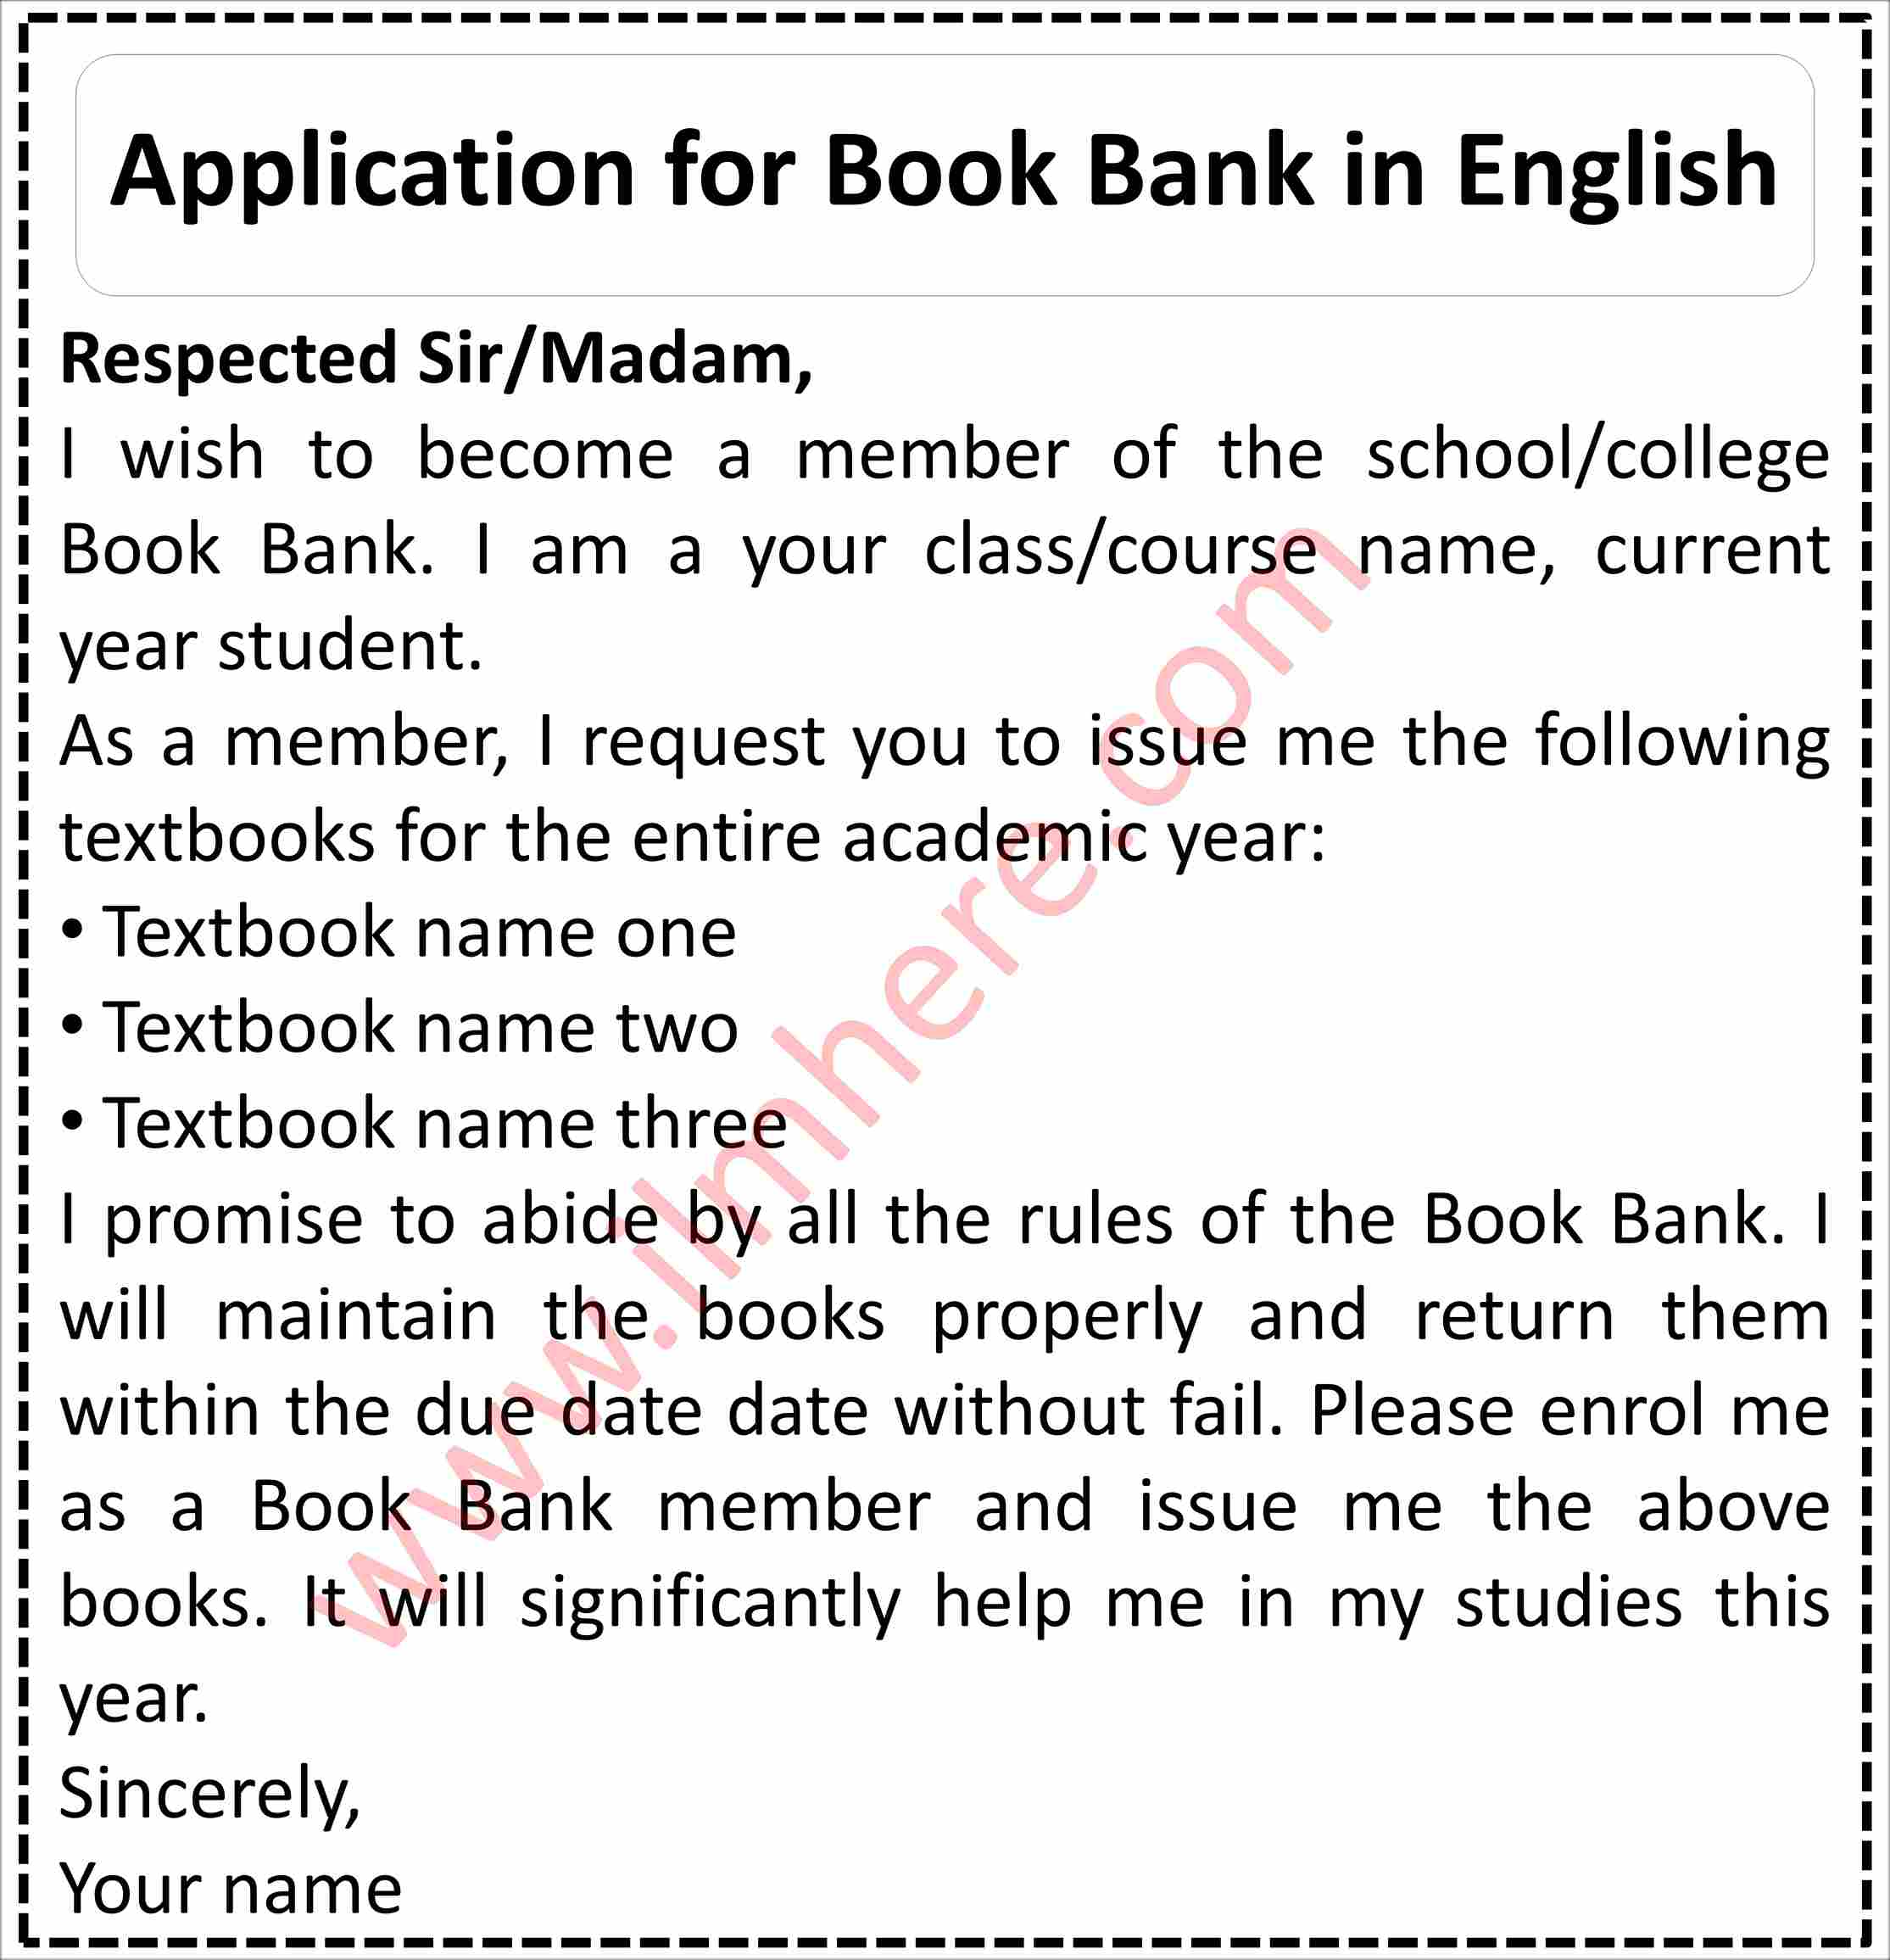 Application for Book Bank in English